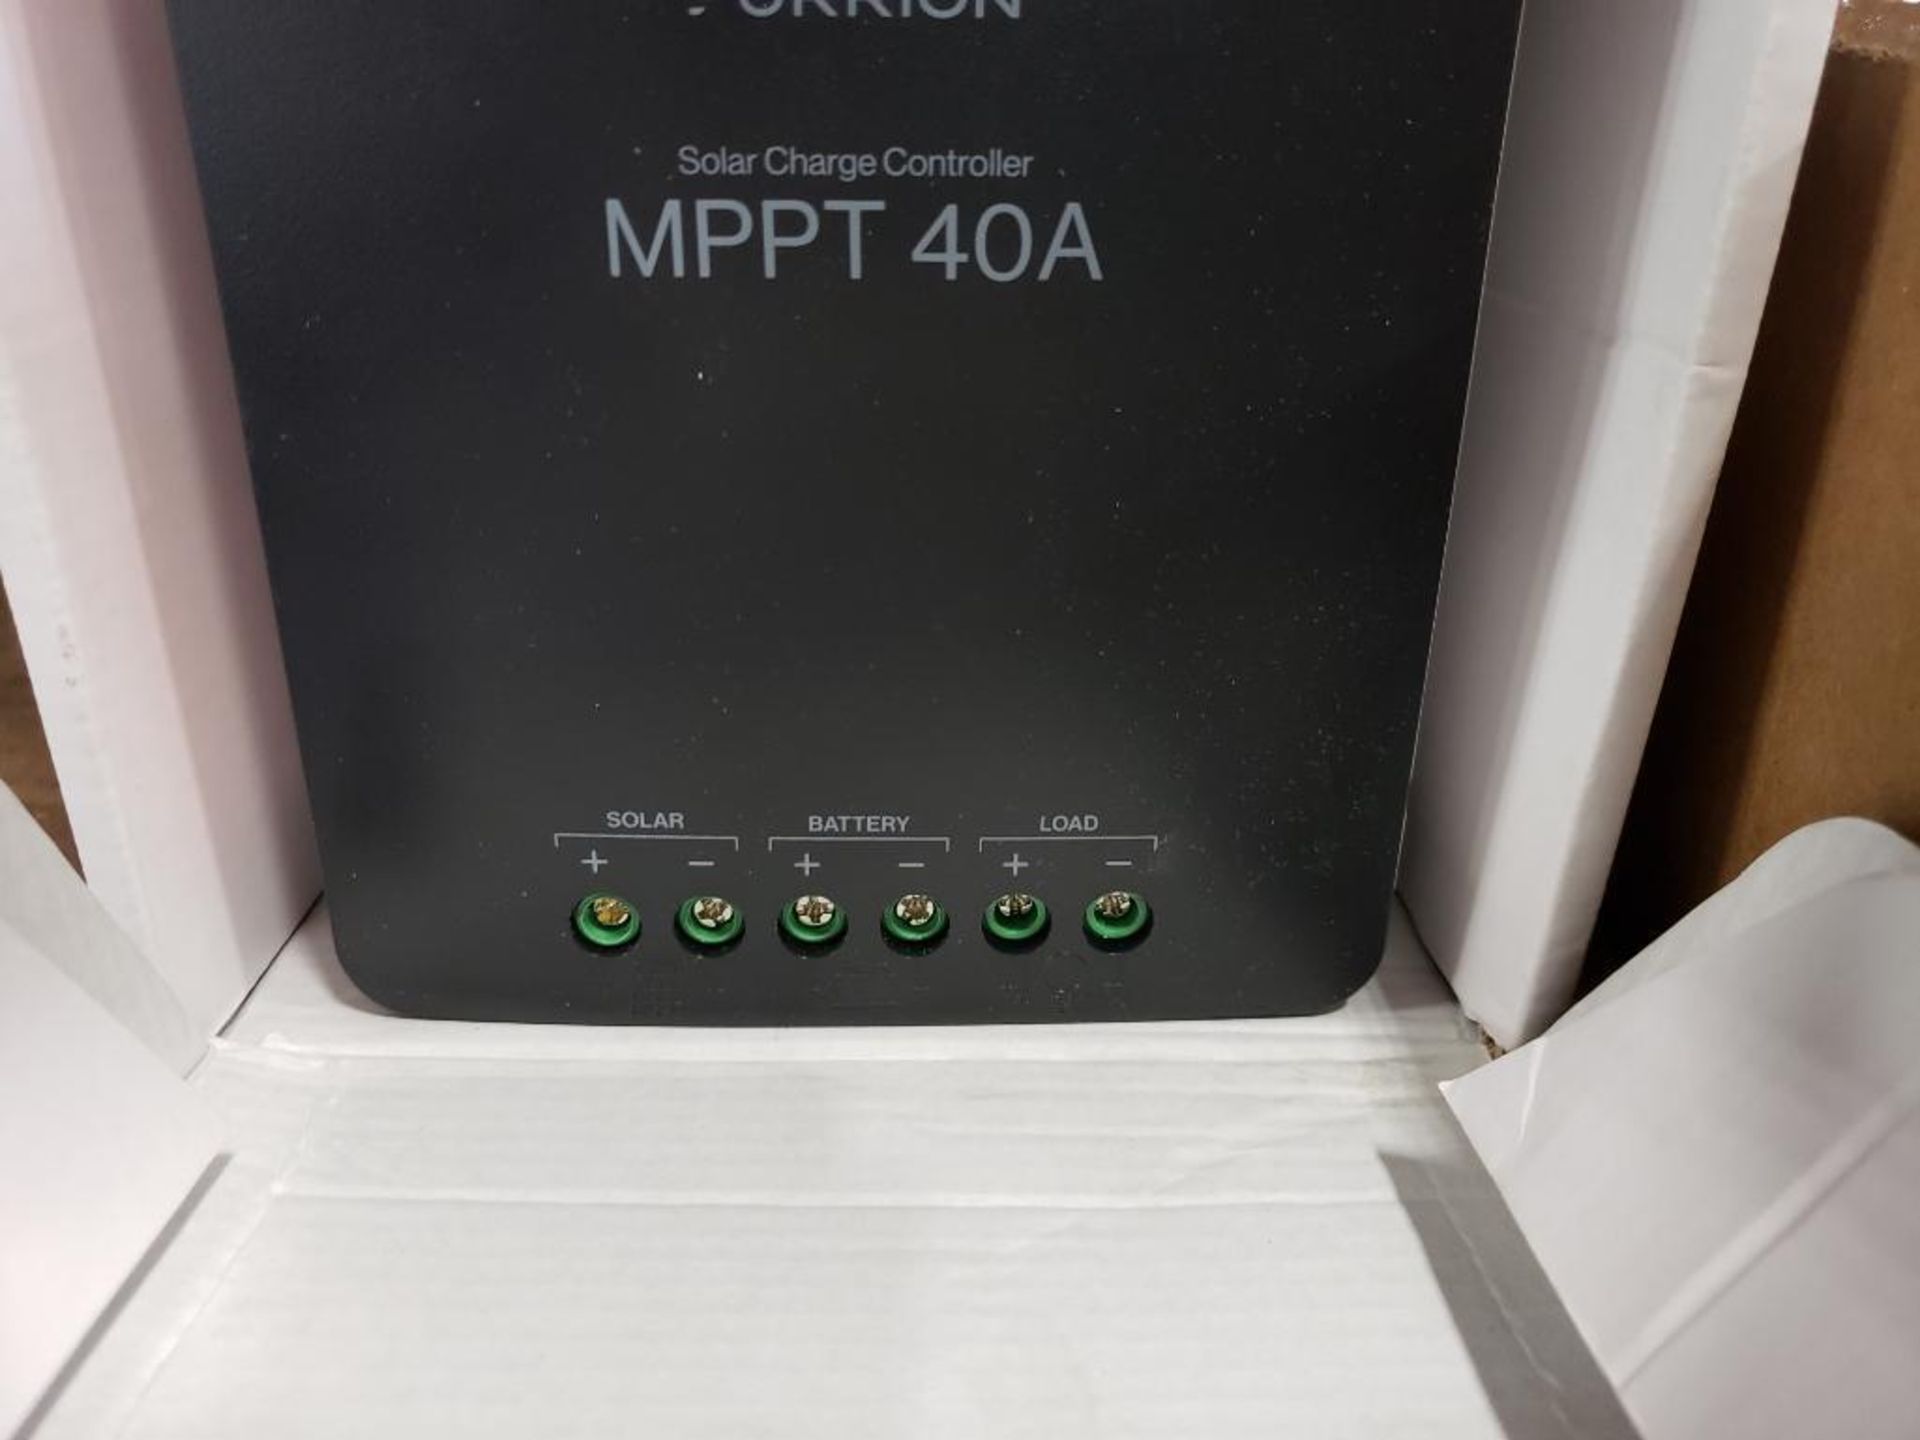 Furrion solar charge controller. Model MPPT-40A. - Image 3 of 6